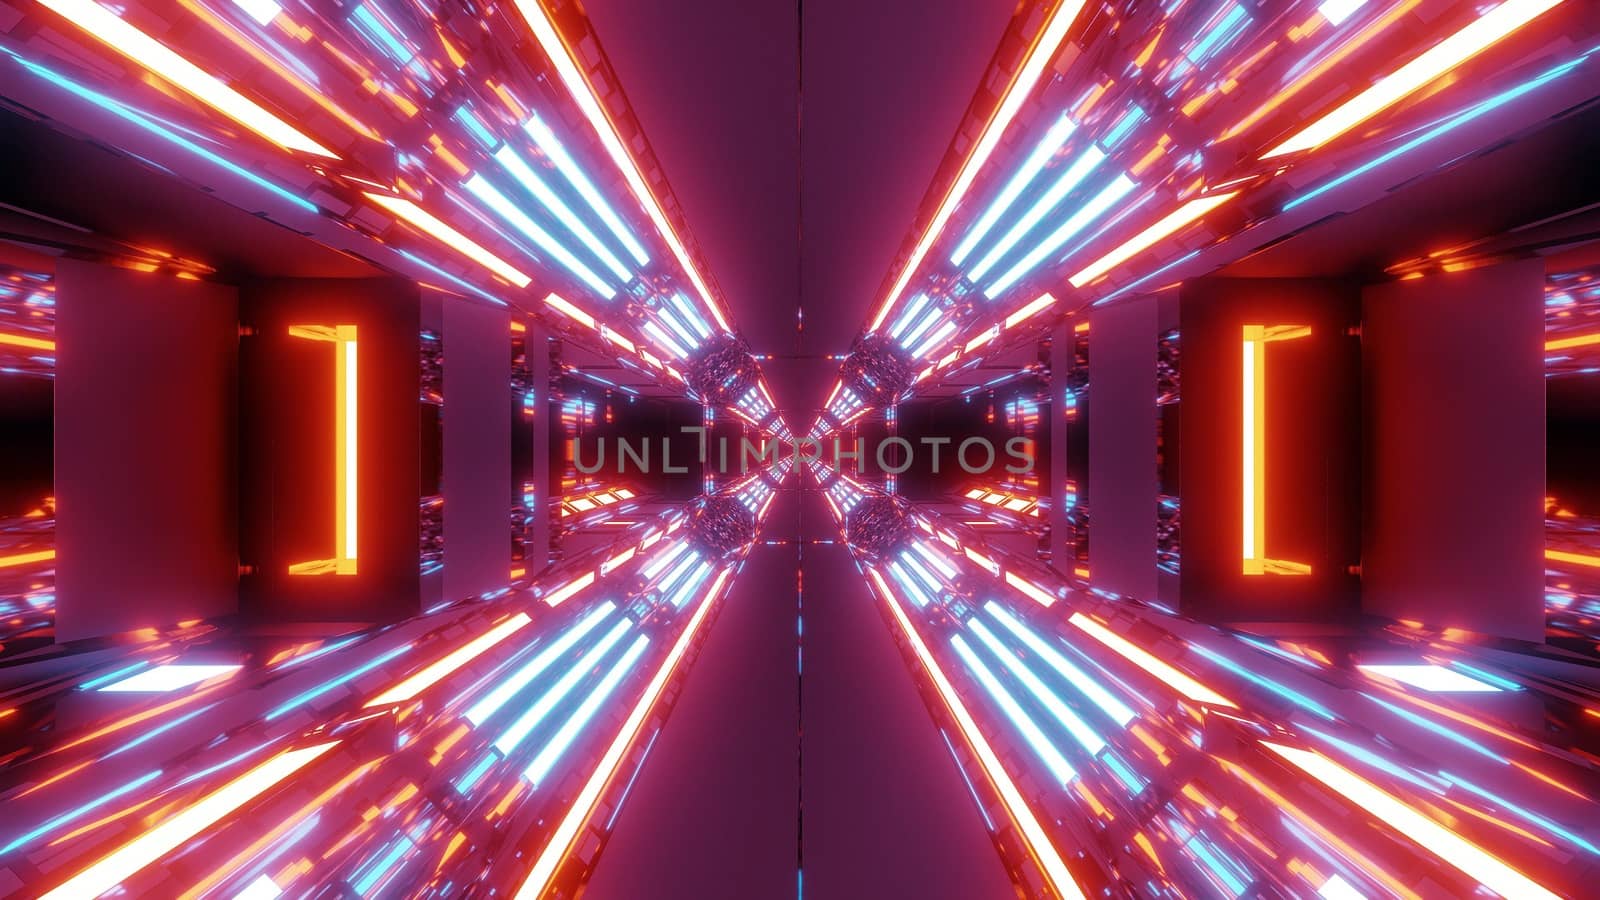 futuristic scifi hangar tunnel corridor with endless glowing lights 3d illustration wallpaper background by tunnelmotions